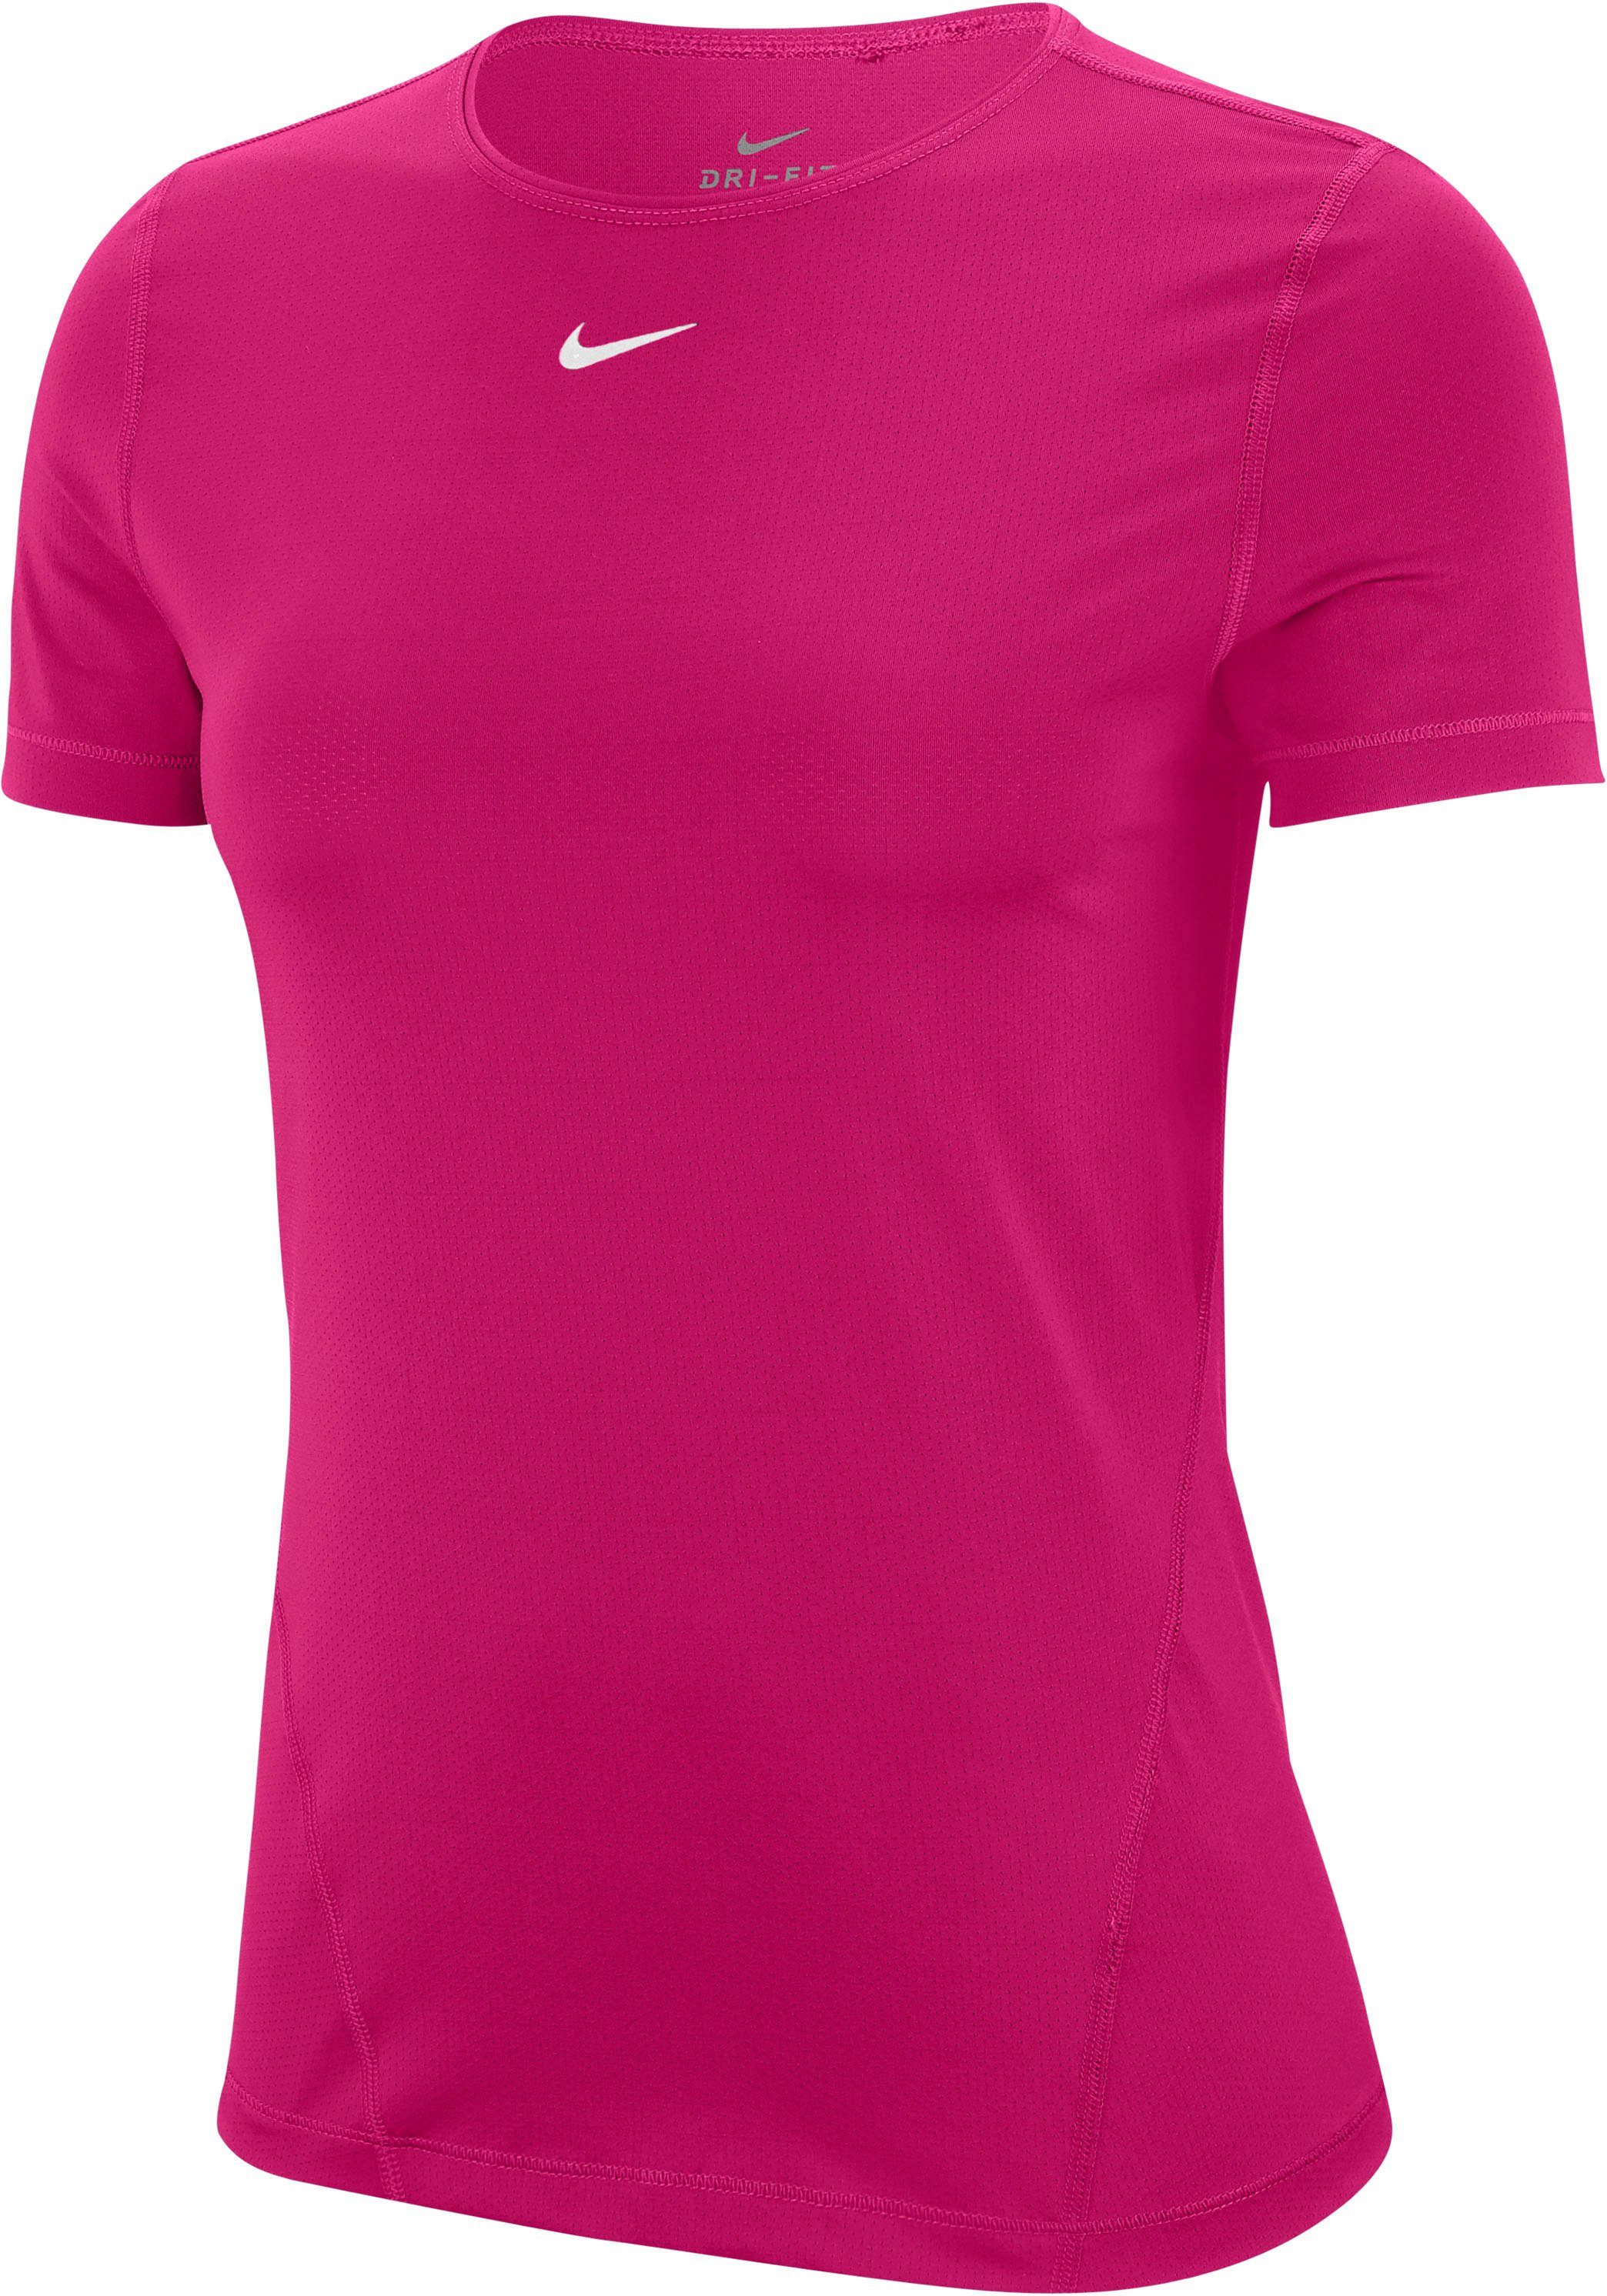 Nike Funktionsshirt »WOMEN NIKE PERFORMANCE TOP SHORTSLEEVE ALL OVER MESH«  DRI-FIT Technology online kaufen | OTTO